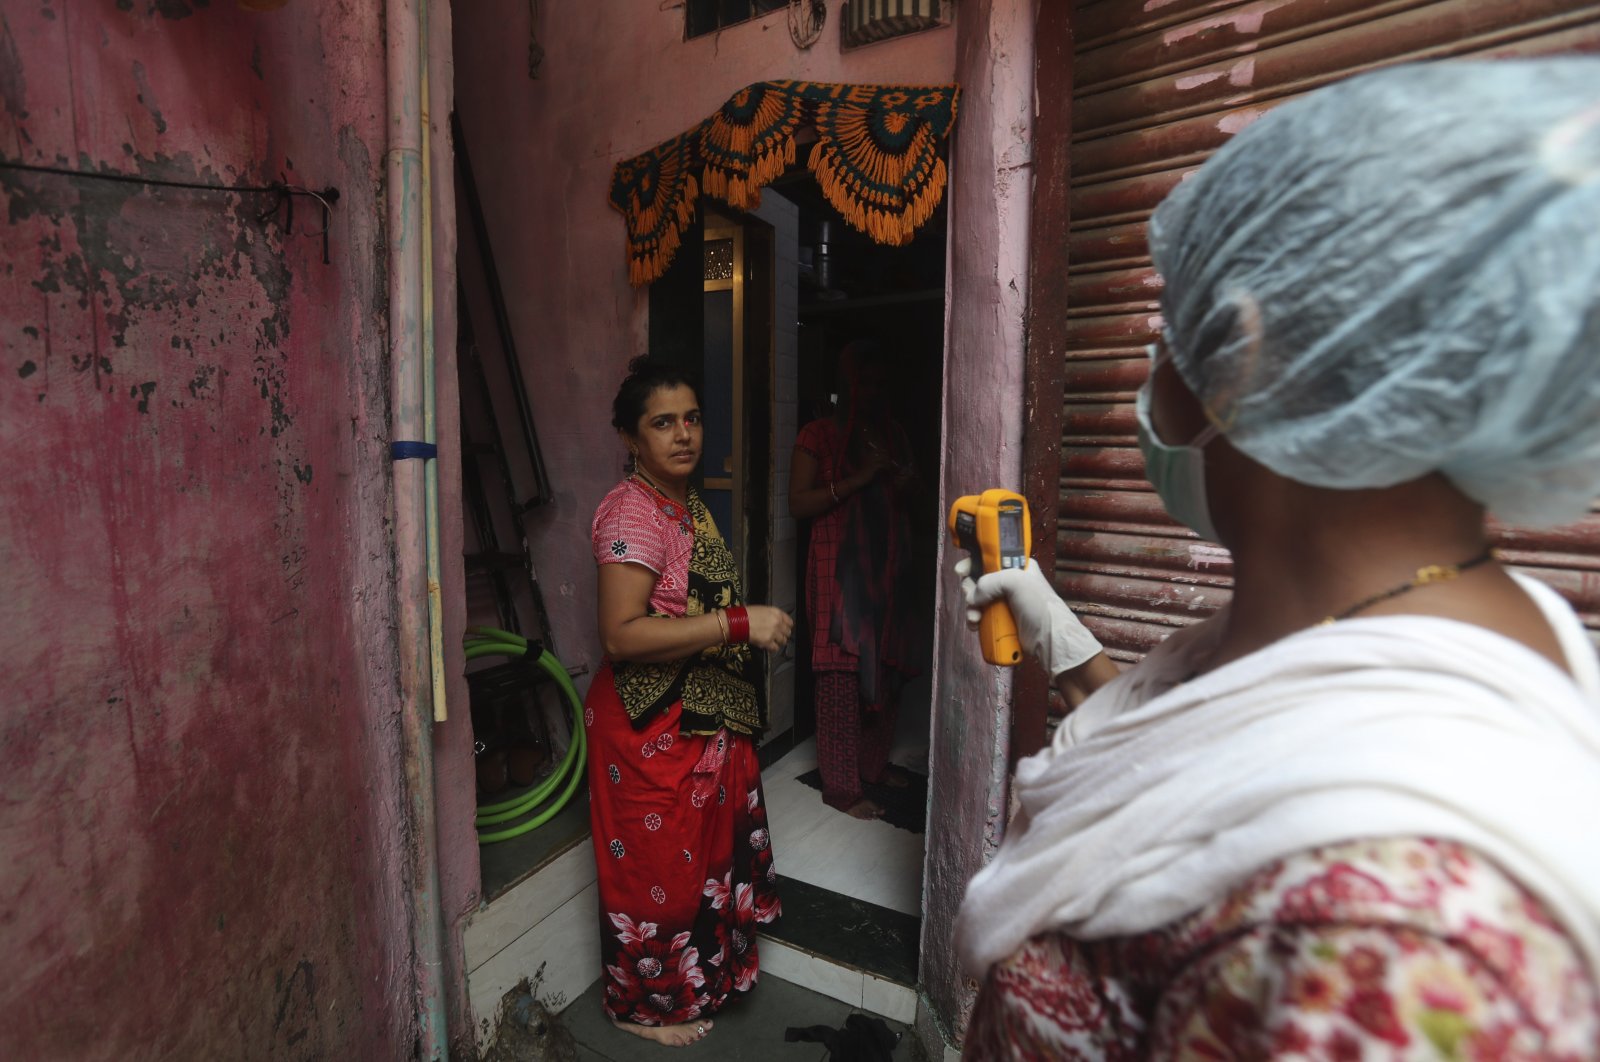 A health worker screens people for symptoms of COVID-19 in Dharavi, one of Asia's biggest slums, in Mumbai, India, Sept. 4, 2020. (AP Photo)